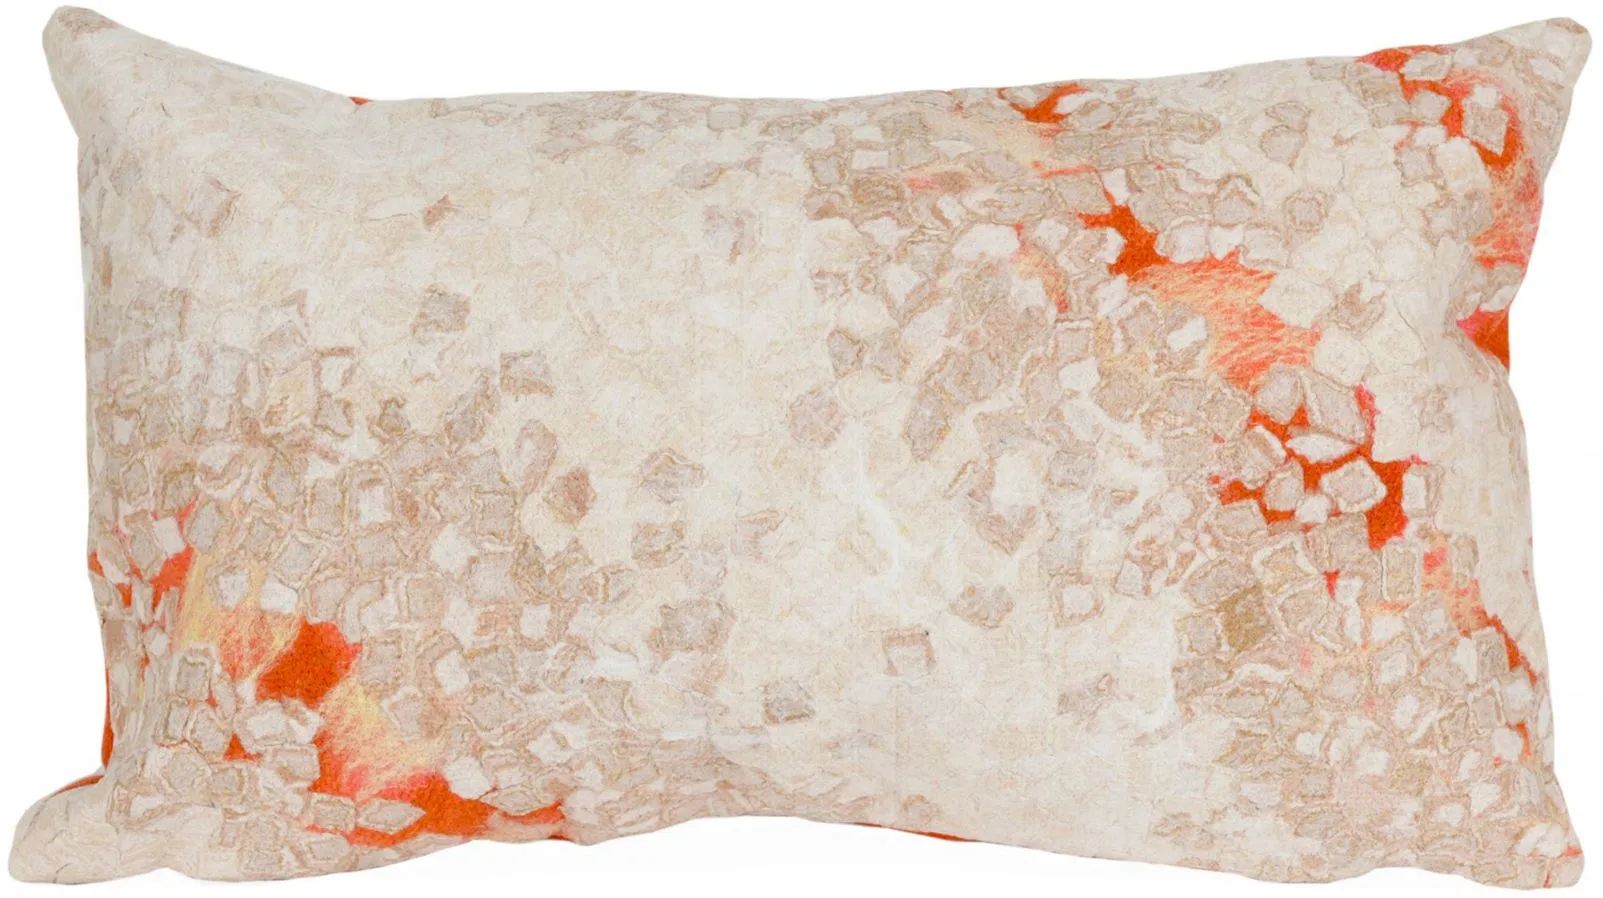 Liora Manne Visions III Elements Pillow in Orange by Trans-Ocean Import Co Inc